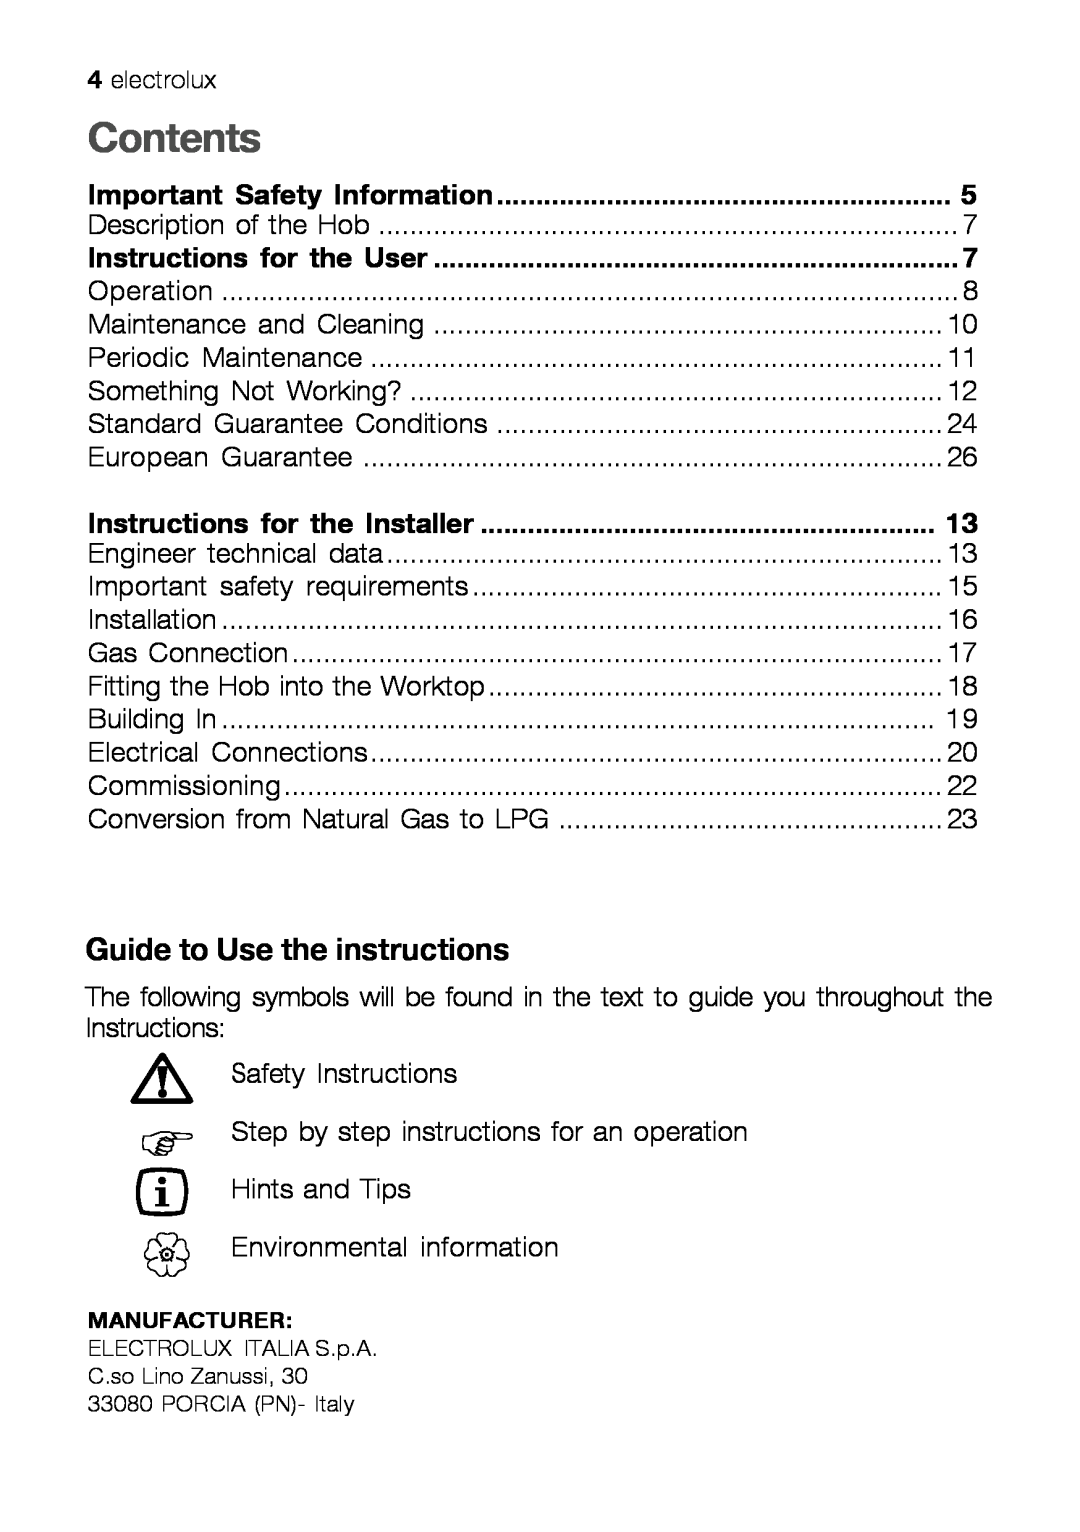 Electrolux EHT 60410 manual Contents, Guide to Use the instructions 